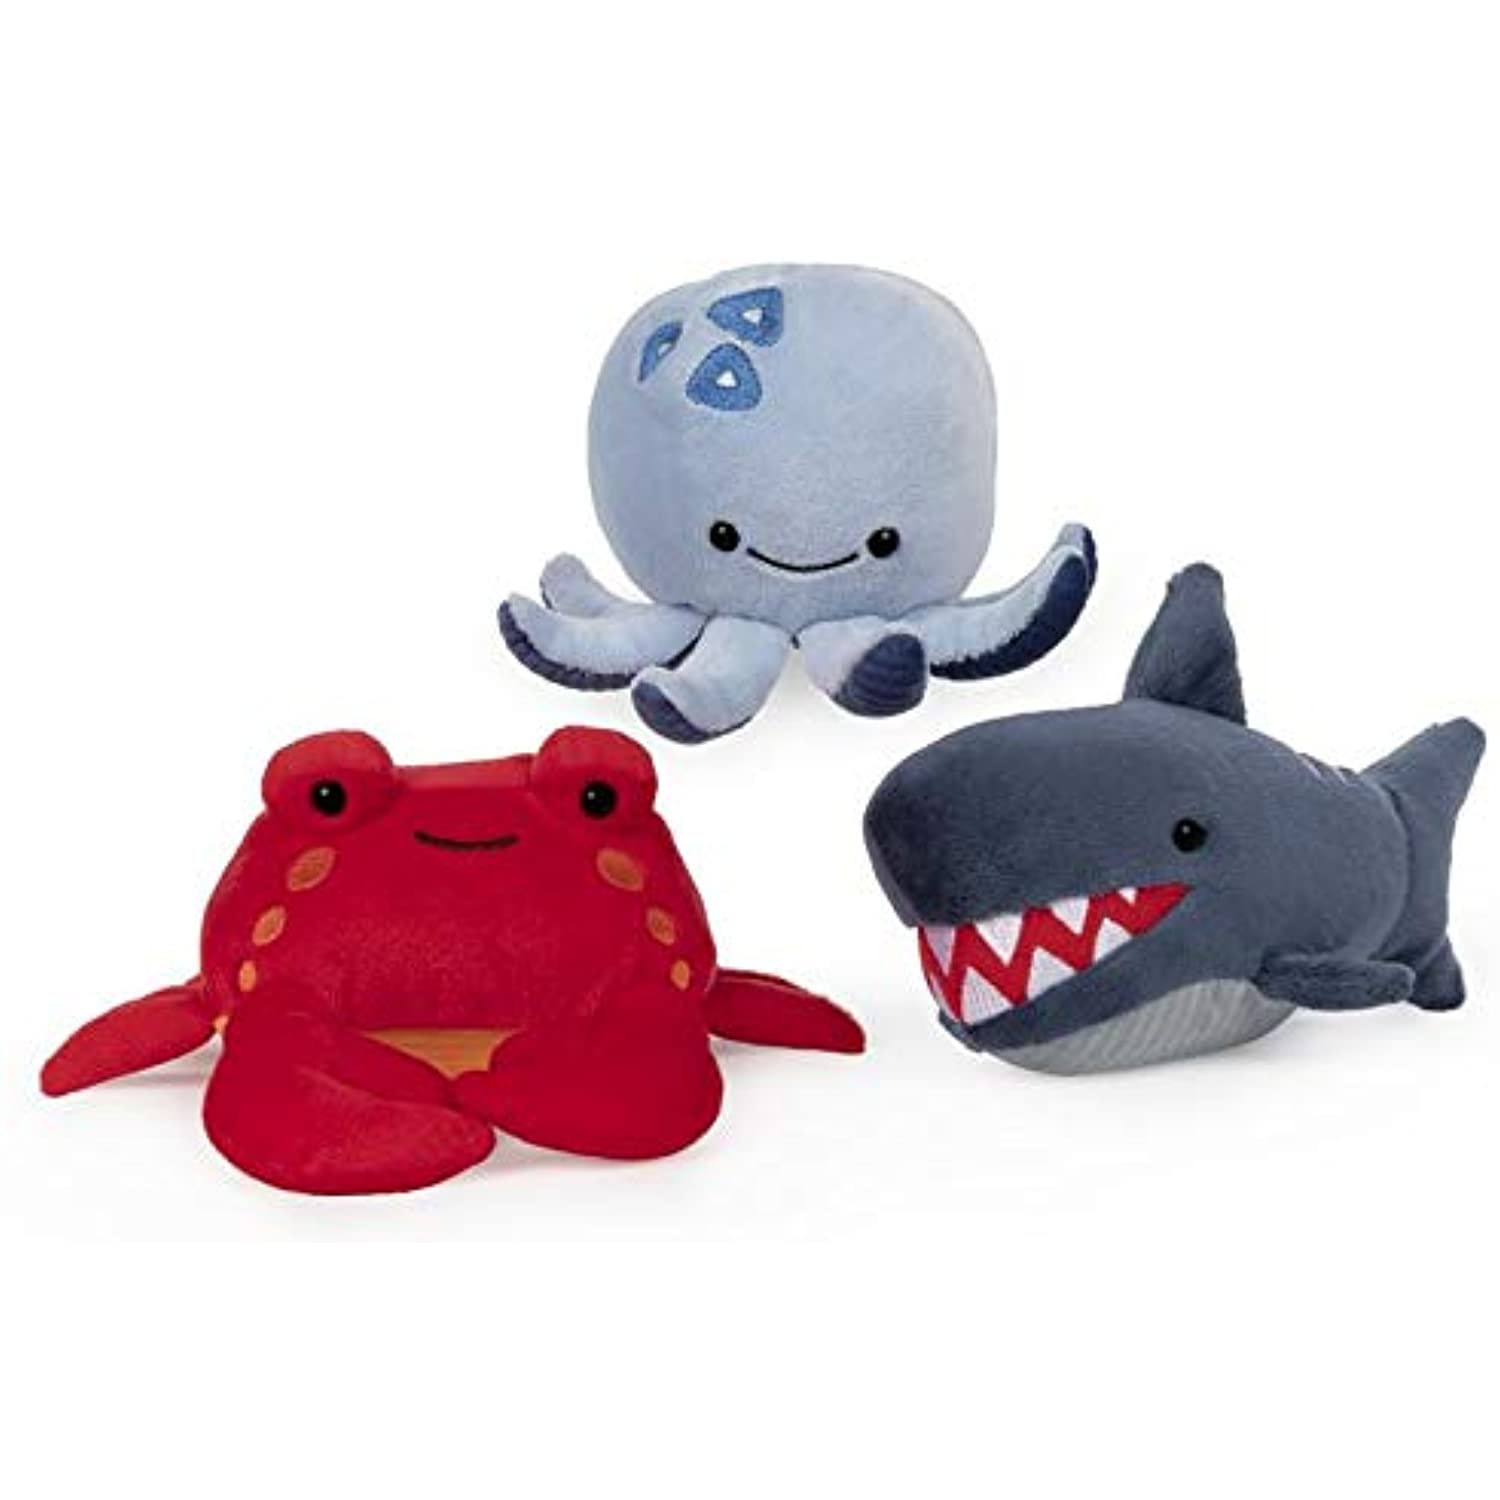 GUND Nautical Plush Animal Collection Crab Shark and Octopus 7 inch